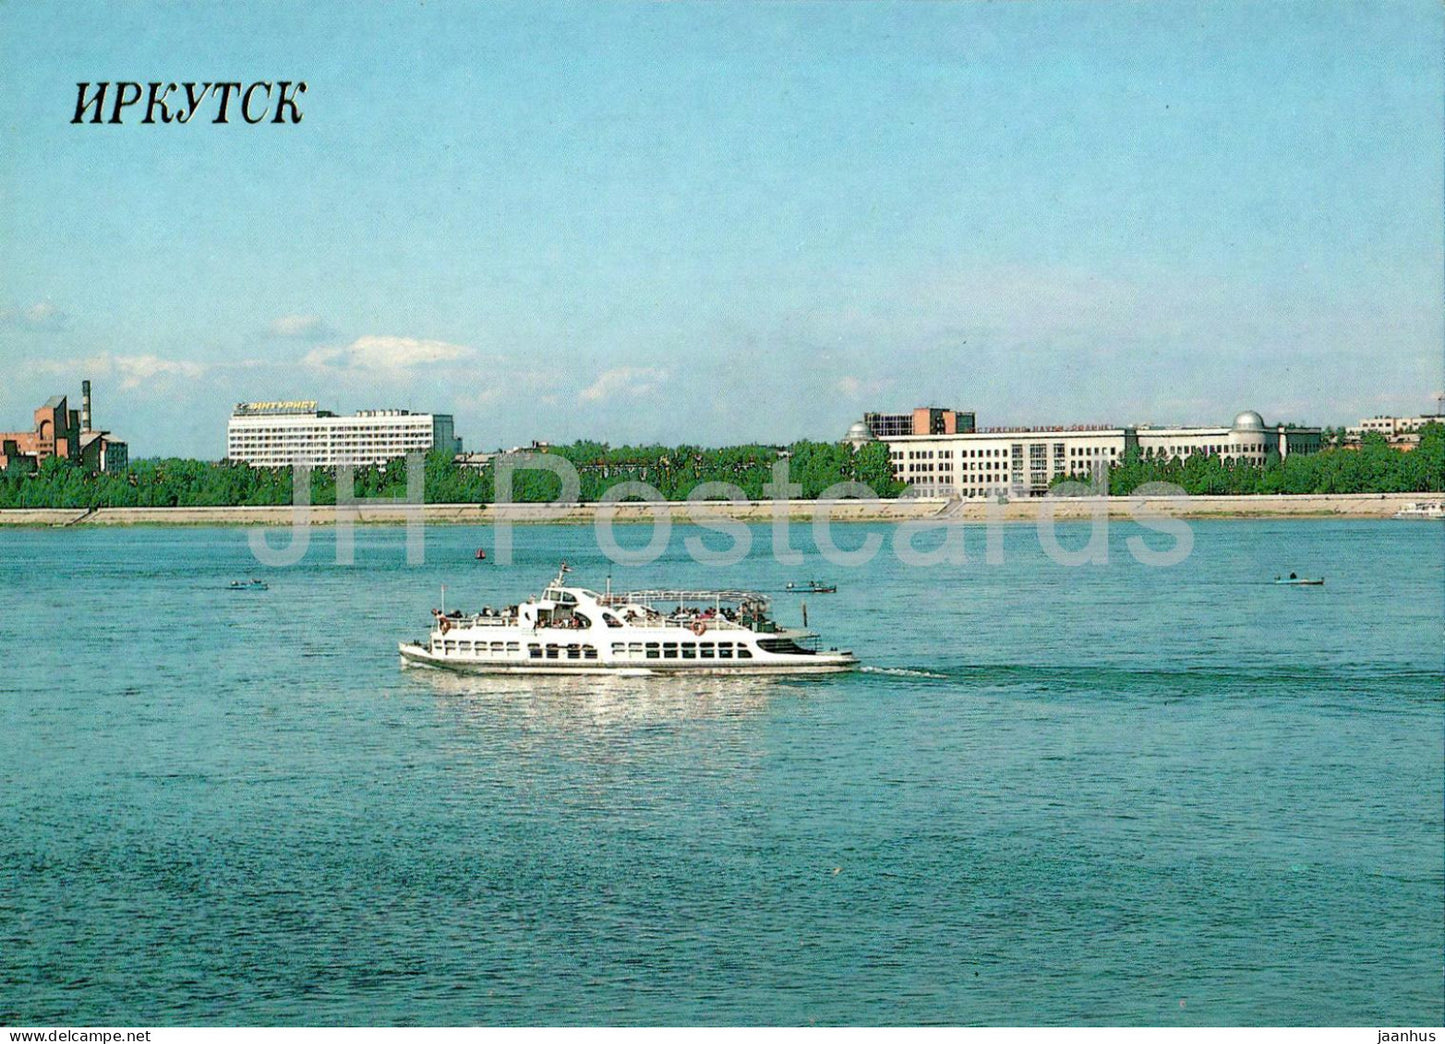 Irkutsk - View from Gagarin Boulevard from the Angara river - ship - 1990 - Russia USSR - unused - JH Postcards